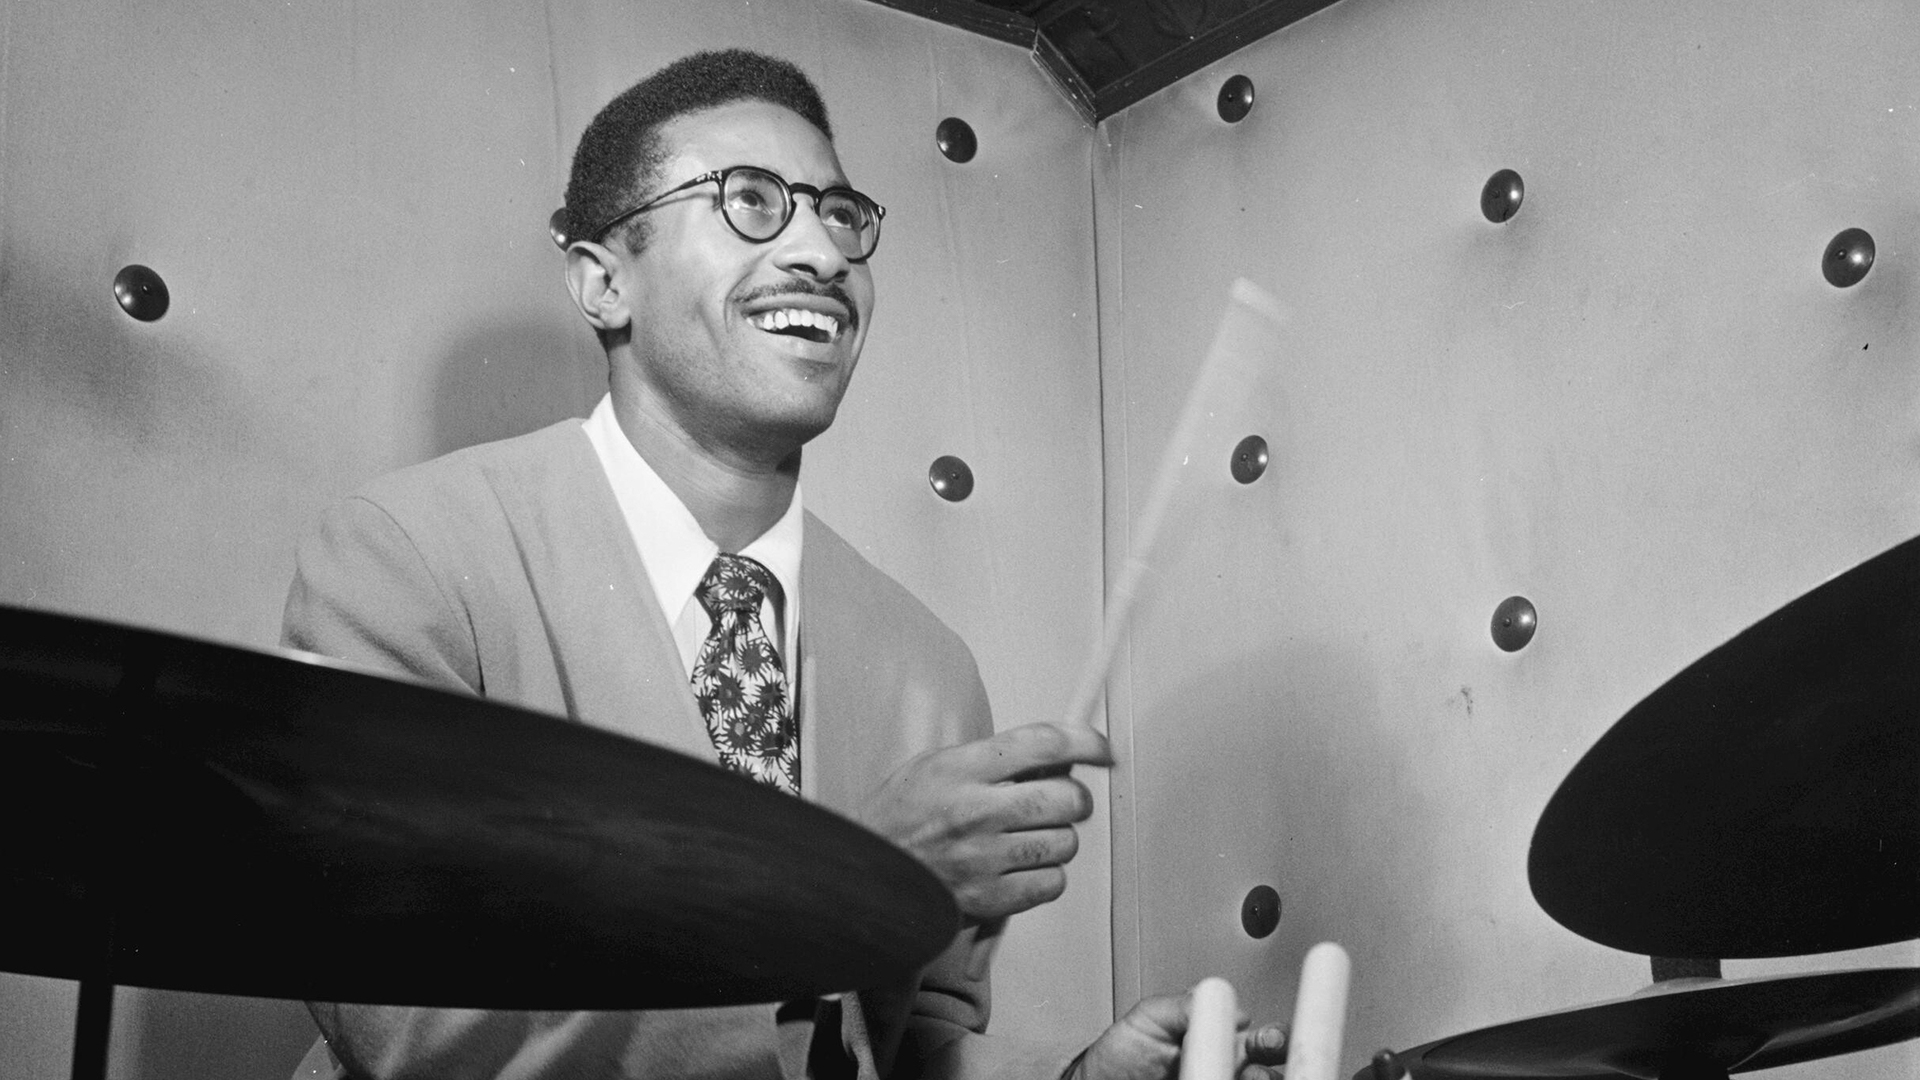 New Max Roach Documentary on PBS Highlights the Tunes and Existence of Revolutionary Jazz Drummer